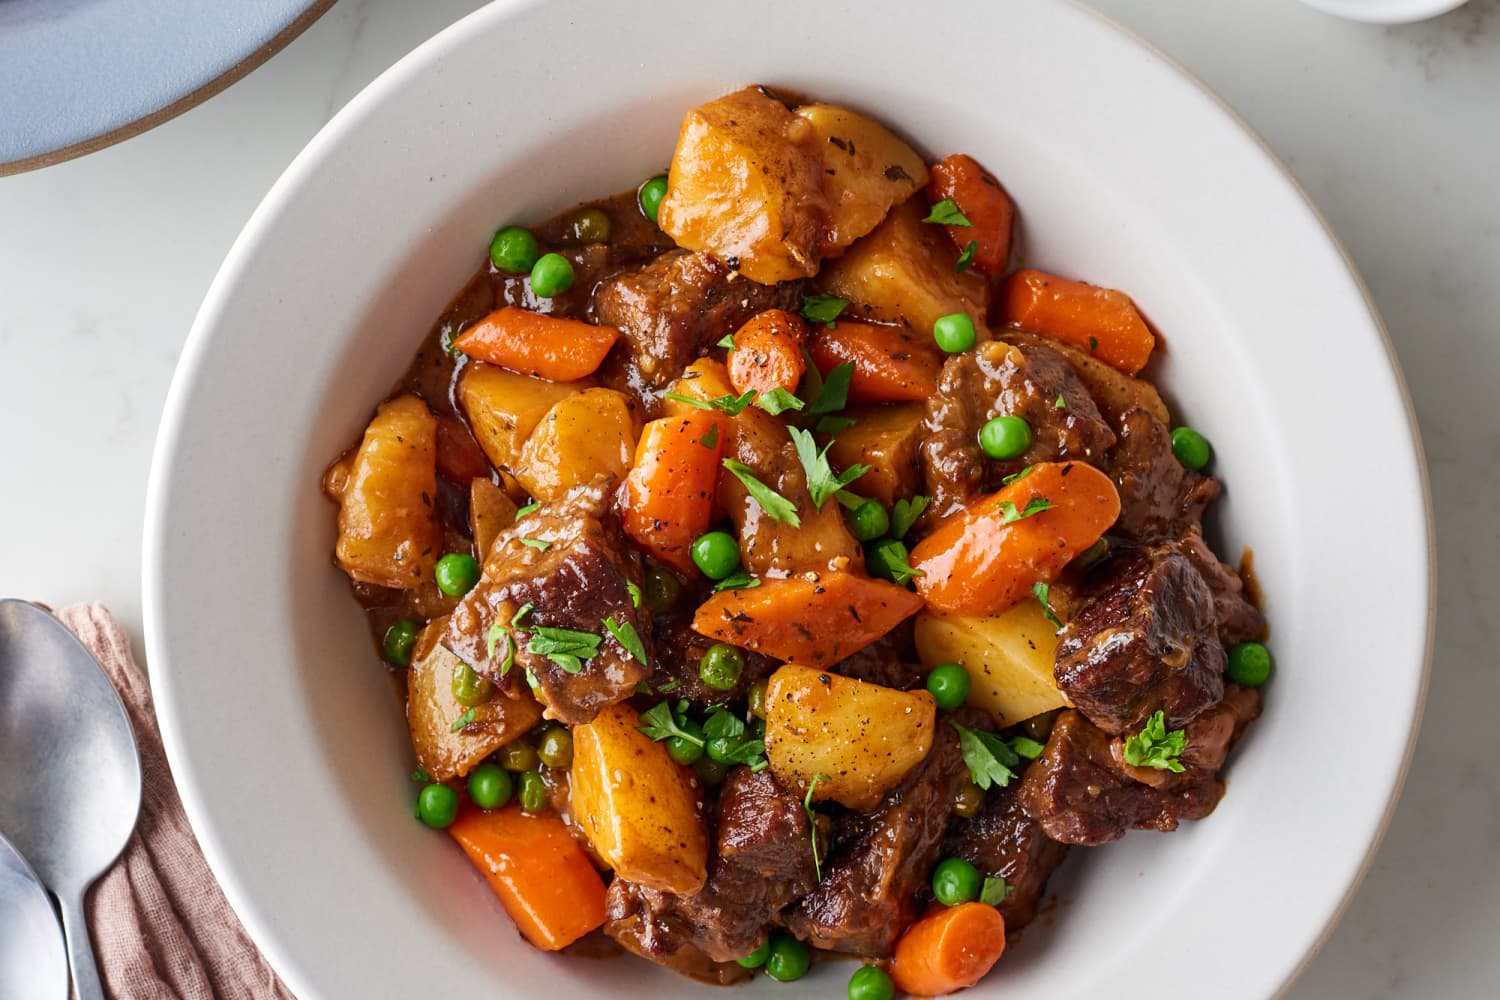 https://cdn.apartmenttherapy.info/image/upload/f_auto,q_auto:eco,c_fill,g_auto,w_1500,ar_3:2/k%2FPhoto%2FRecipes%2F2019-10-how-to-instant-pot-beef-stew%2F2019-10-21_Kitchn88948_HT-Beef-Stew